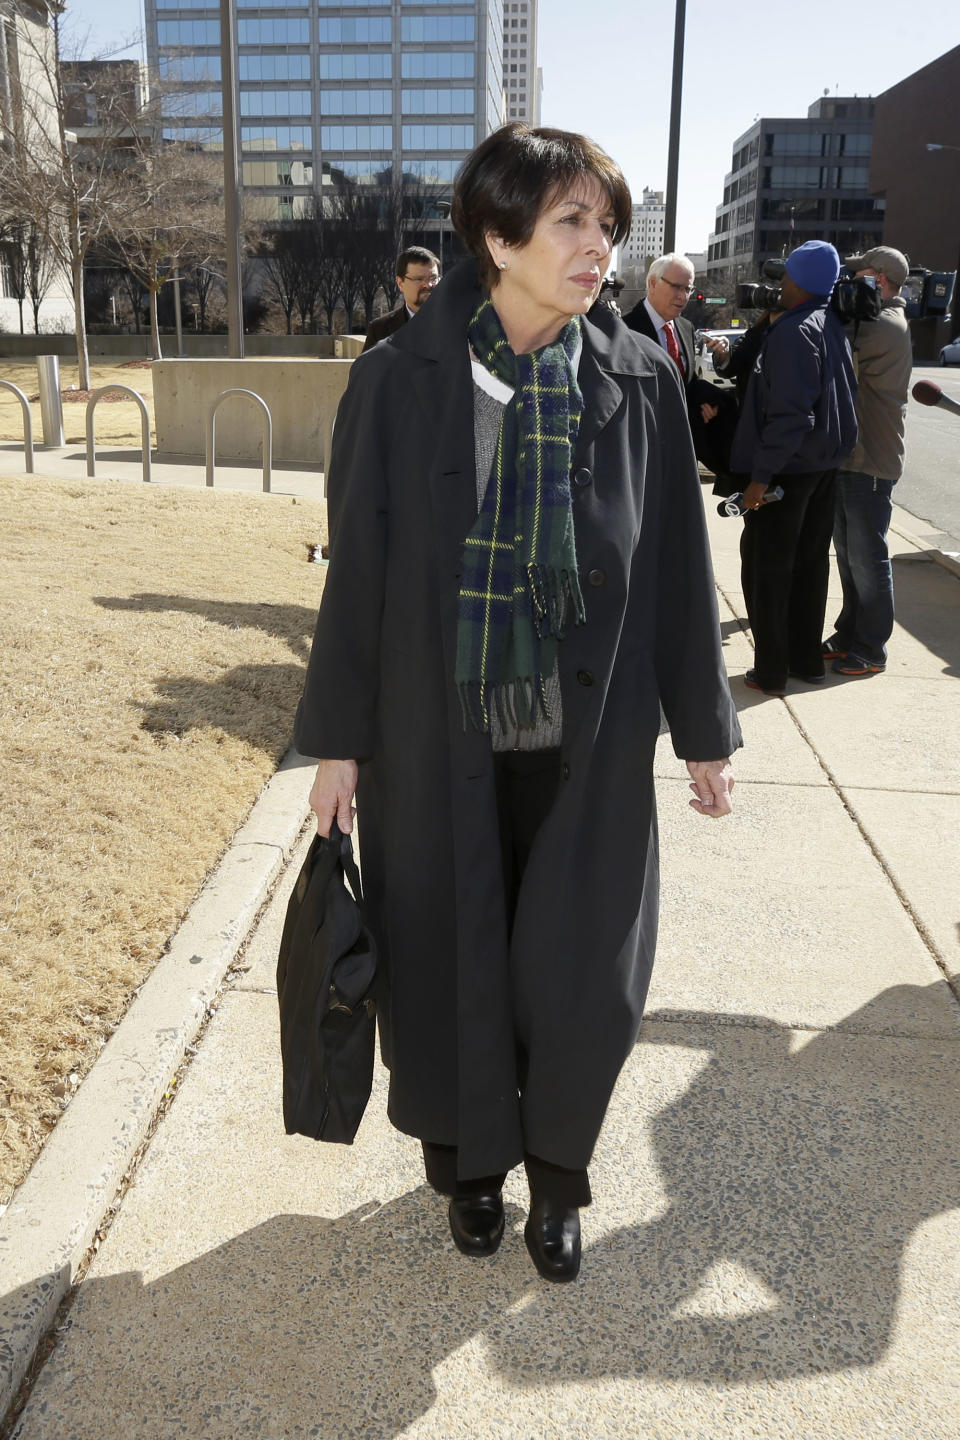 Former Arkansas treasurer Martha Shoffner walks from the federal courthouse in Little Rock, Ark., after she pleaded not guilty to mail fraud charges that allege she misspent thousands of dollars in campaign money on personal items.Thursday, Feb. 27, 2014. (AP Photo/Danny Johnston)